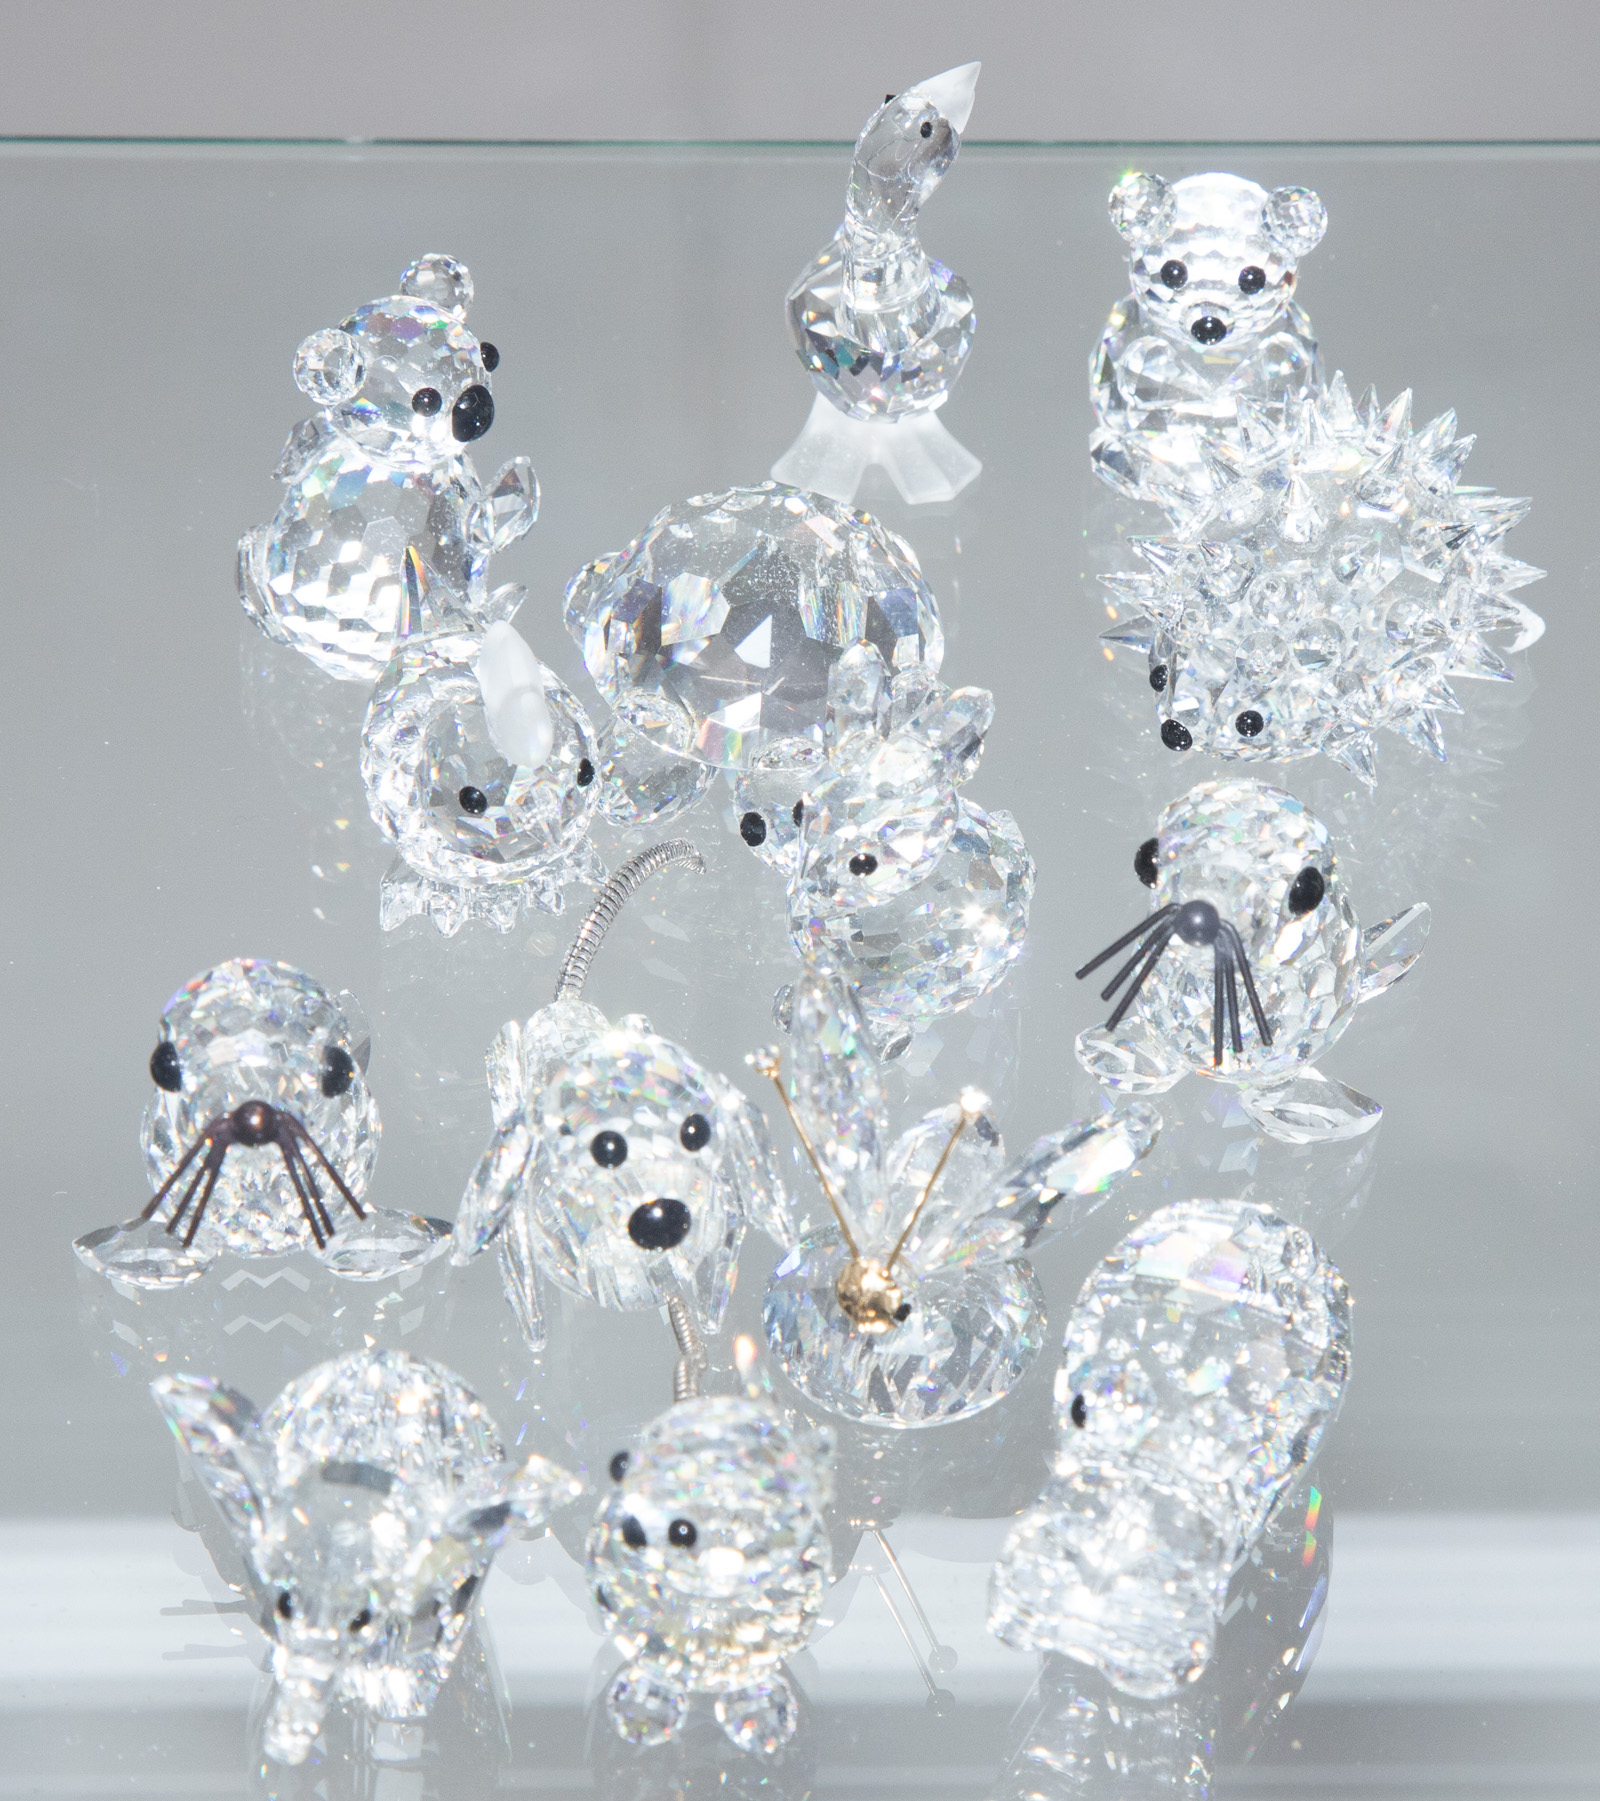 A LARGE COLLECTION OF SWAROVSKI